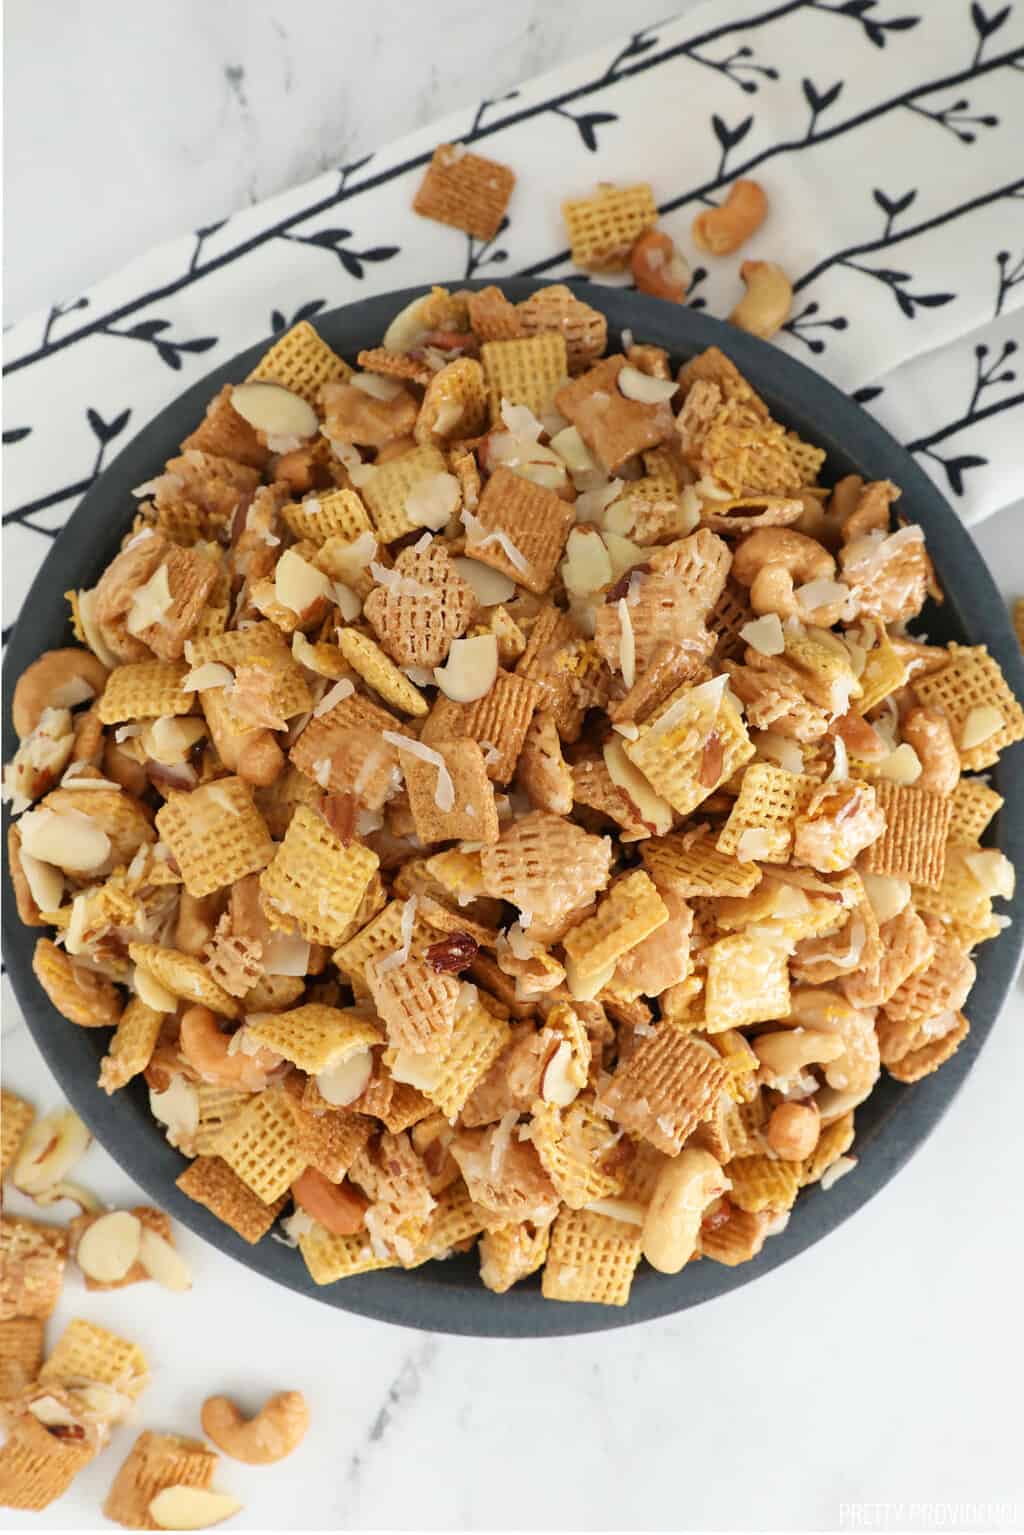 Gooey Chex mix - close up of Chex, cashews, coconut, almonds with sticky caramel coating in a white bowl.